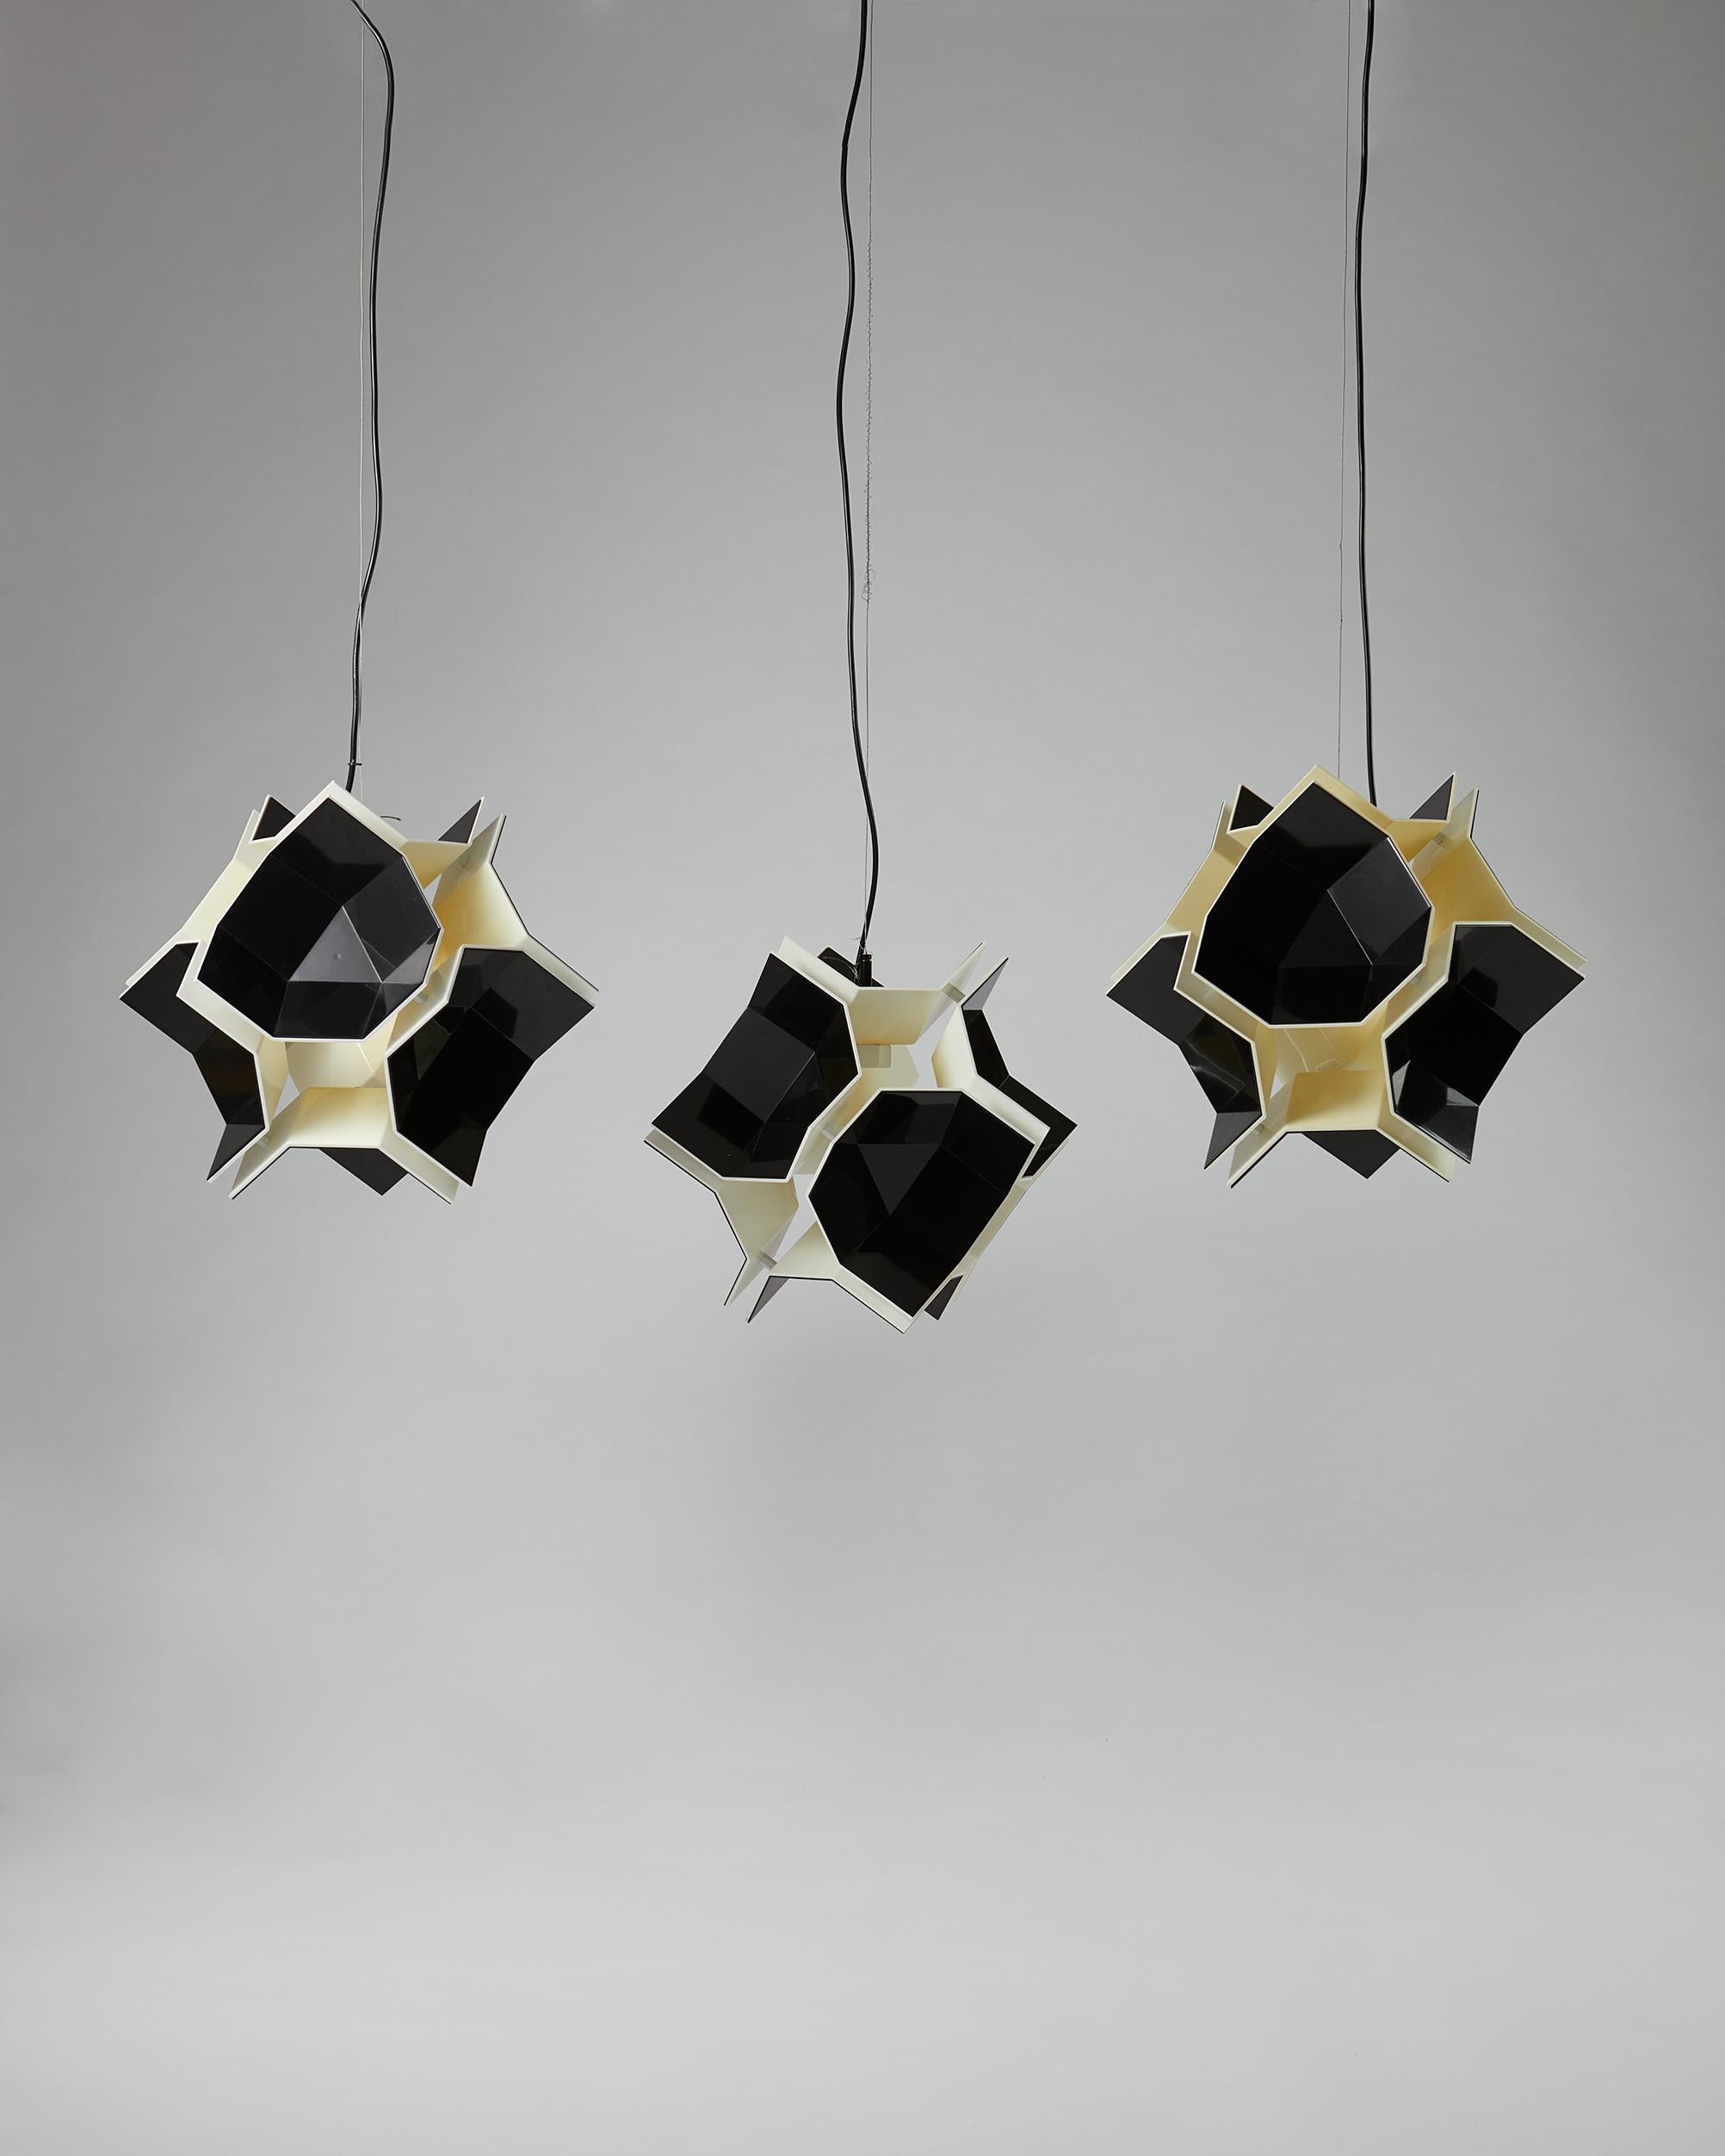 Modern Set of Three T&T Ceiling Lamps Designed by Christophe de Ryck for Dark